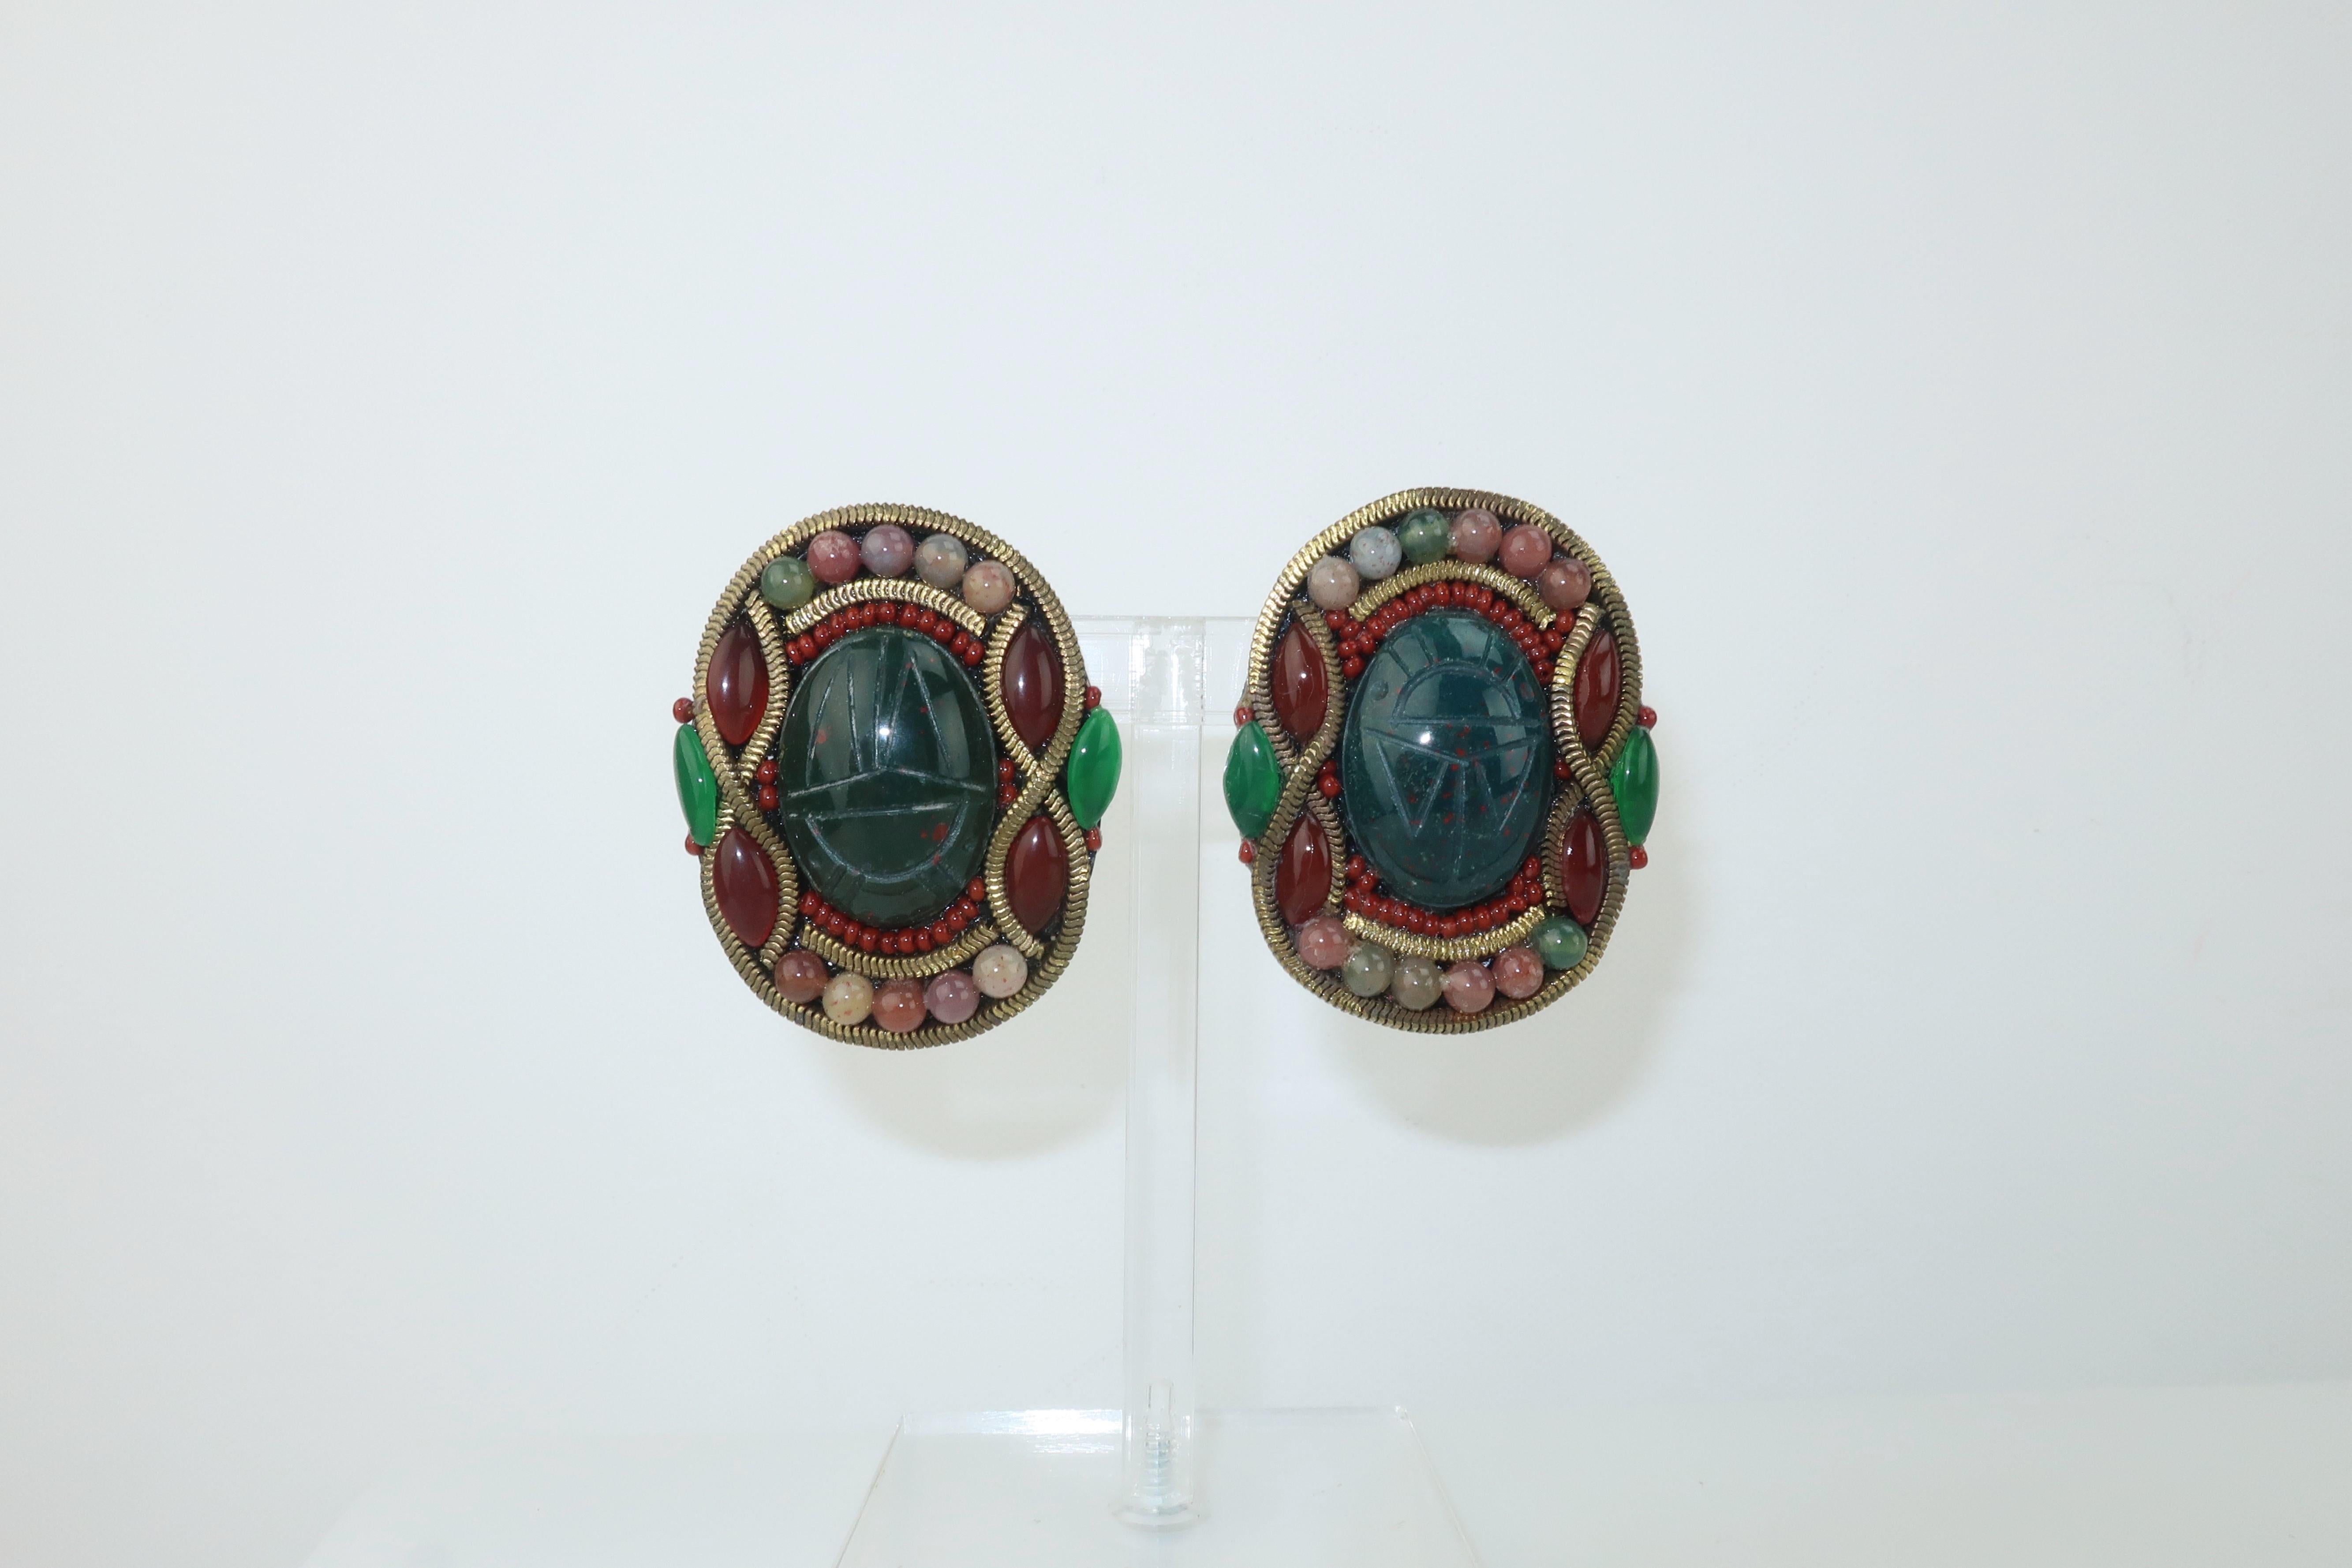 These exotically styled earrings from M & J Hansen are a black resin base accented by dark green carved stone scarabs surrounded by glass beads replicating rose quartz and carnelian.  A textured chain border adds to the design which is reminiscent